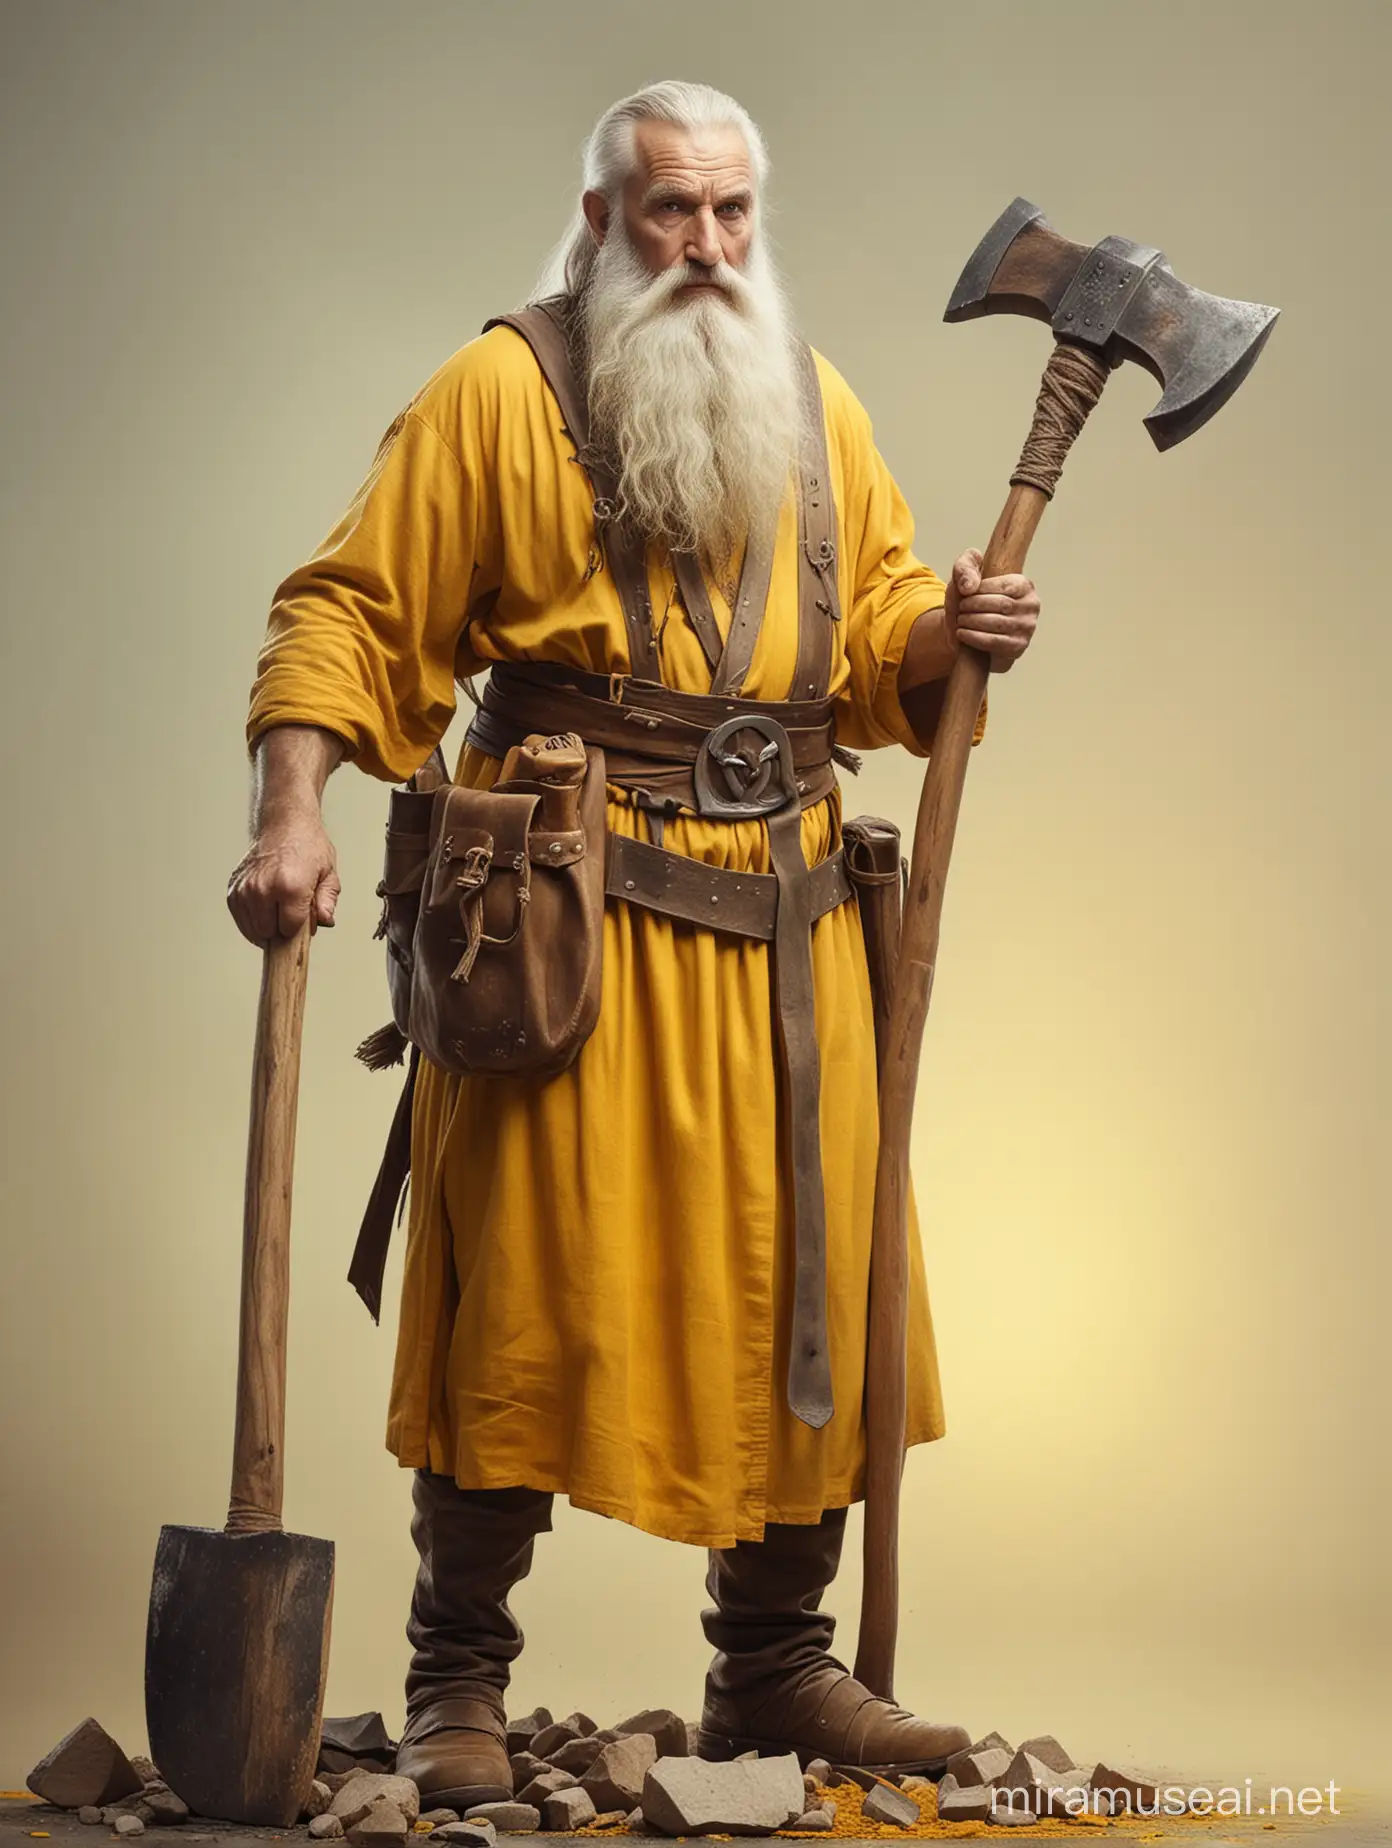 Mighty Labor God in Yellow Attire Wielding Axe and Hammer